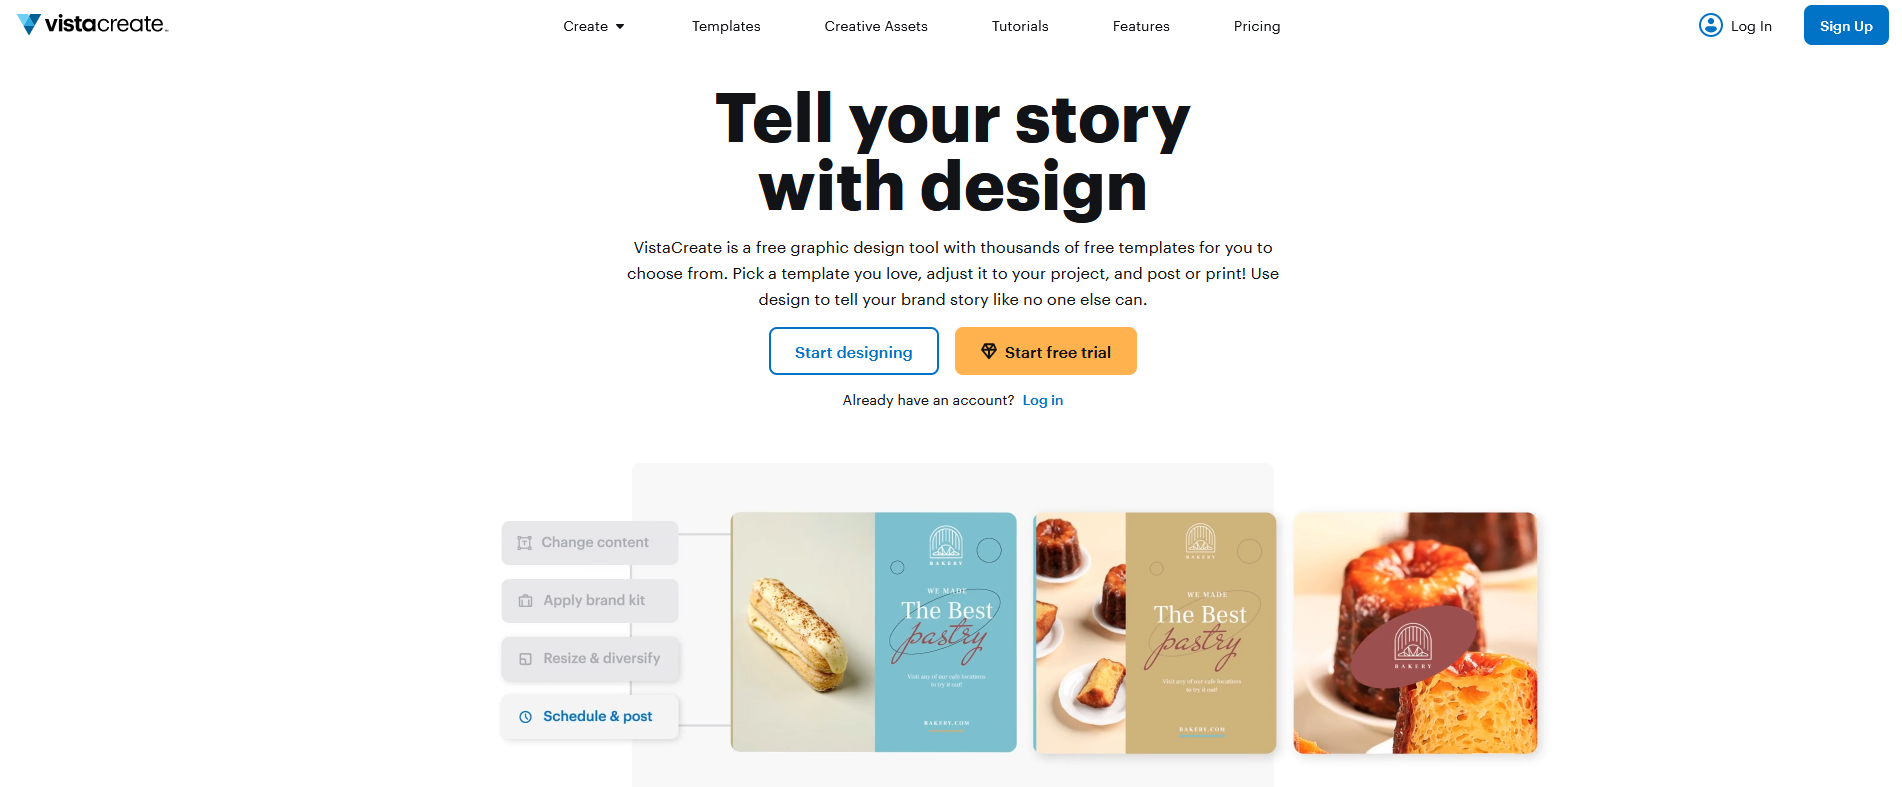 Crello Features: Exploring the Tools and Functions of the Graphic Design Platform